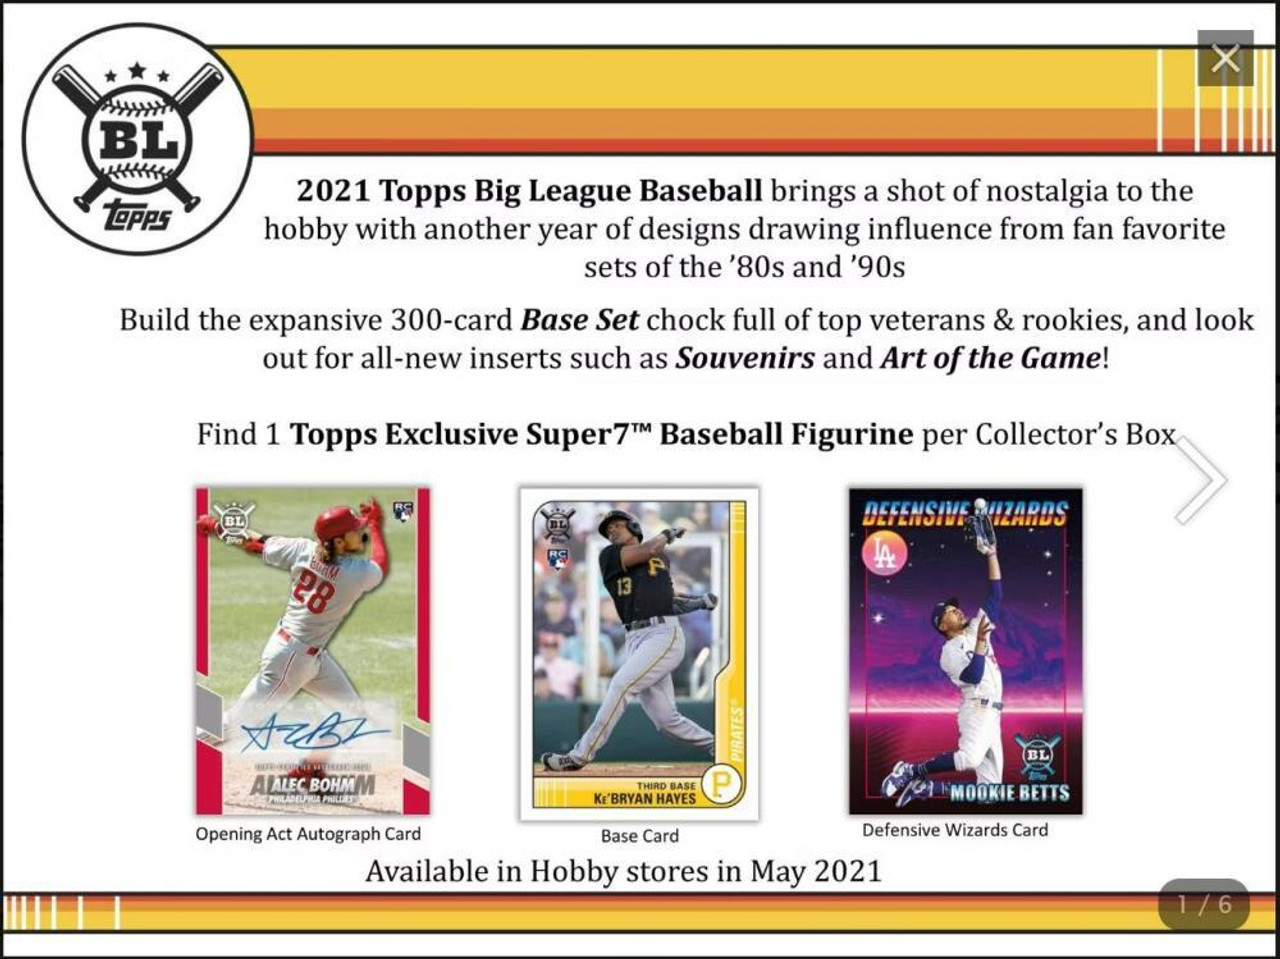 2021 Topps Big League Baseball Checklist, Details, Boxes, Review